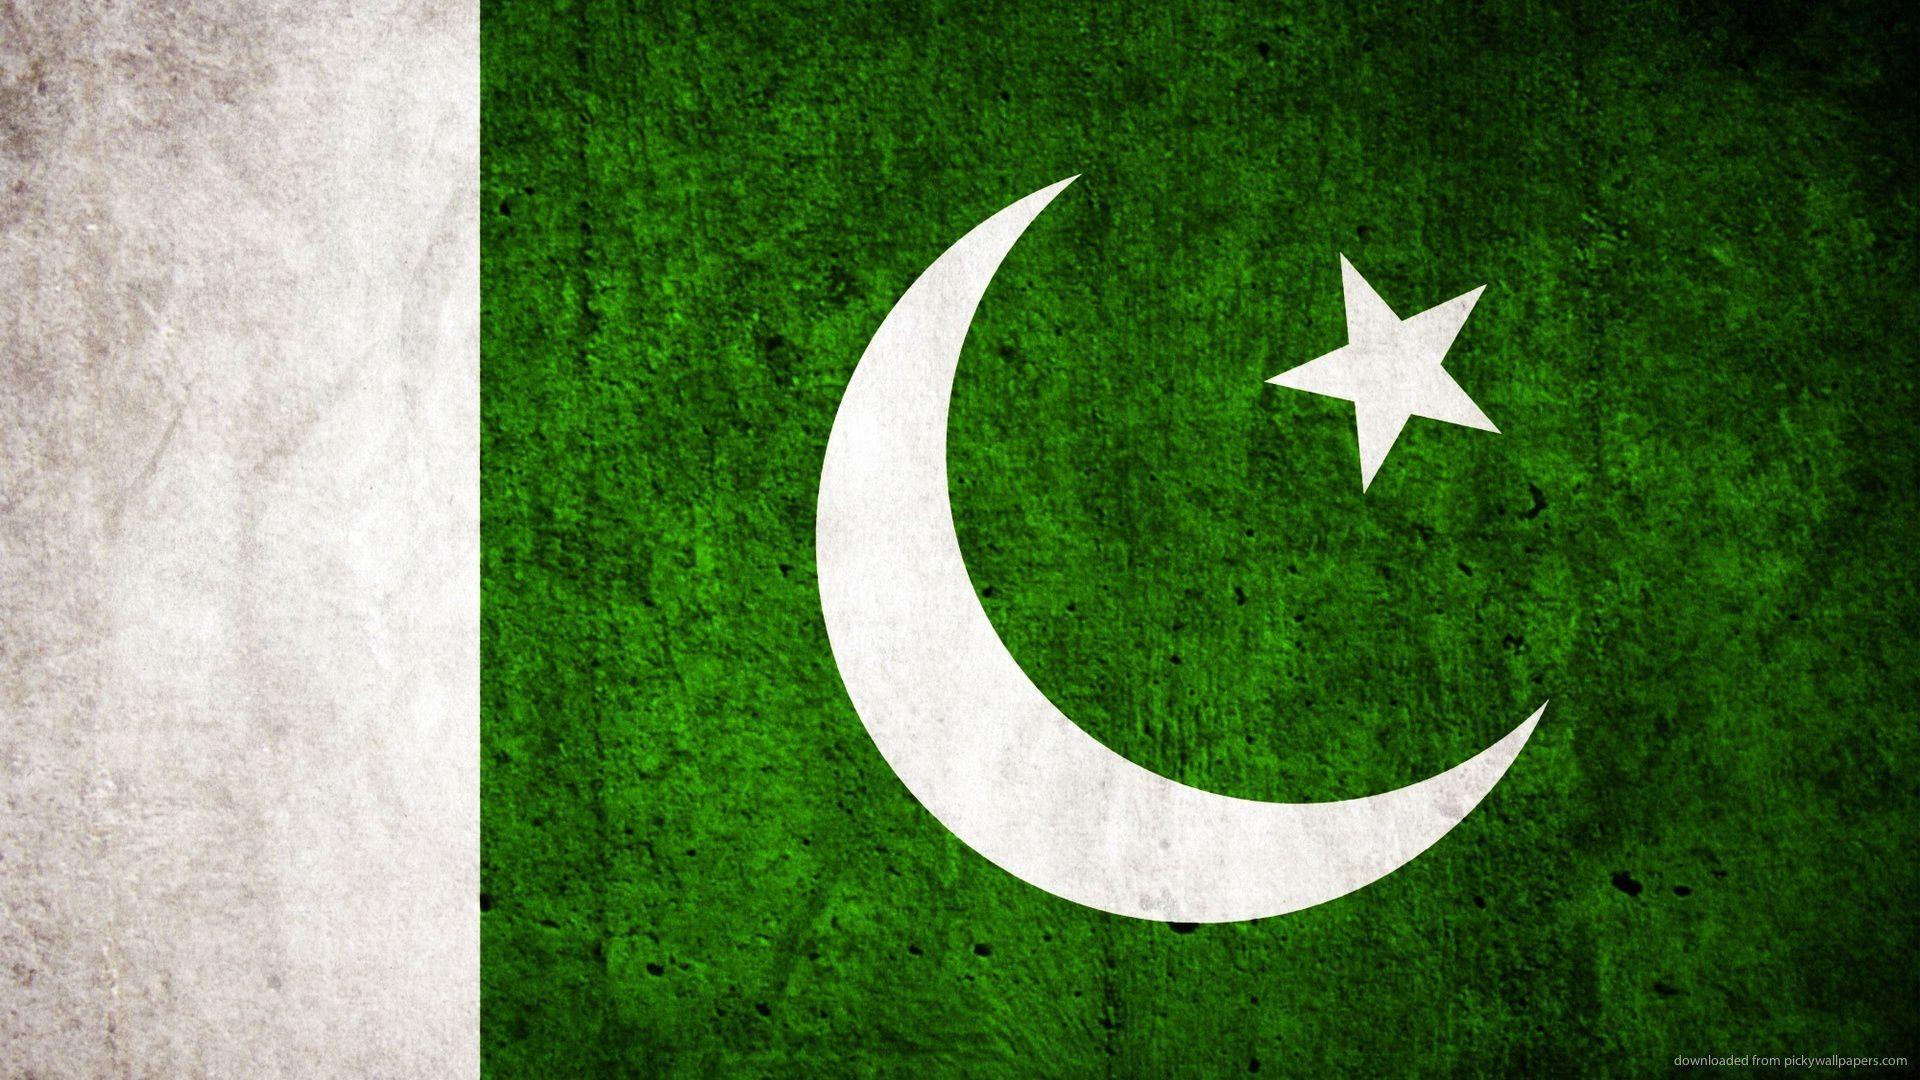 Pakistan Flag Wallpaper For Android Apk